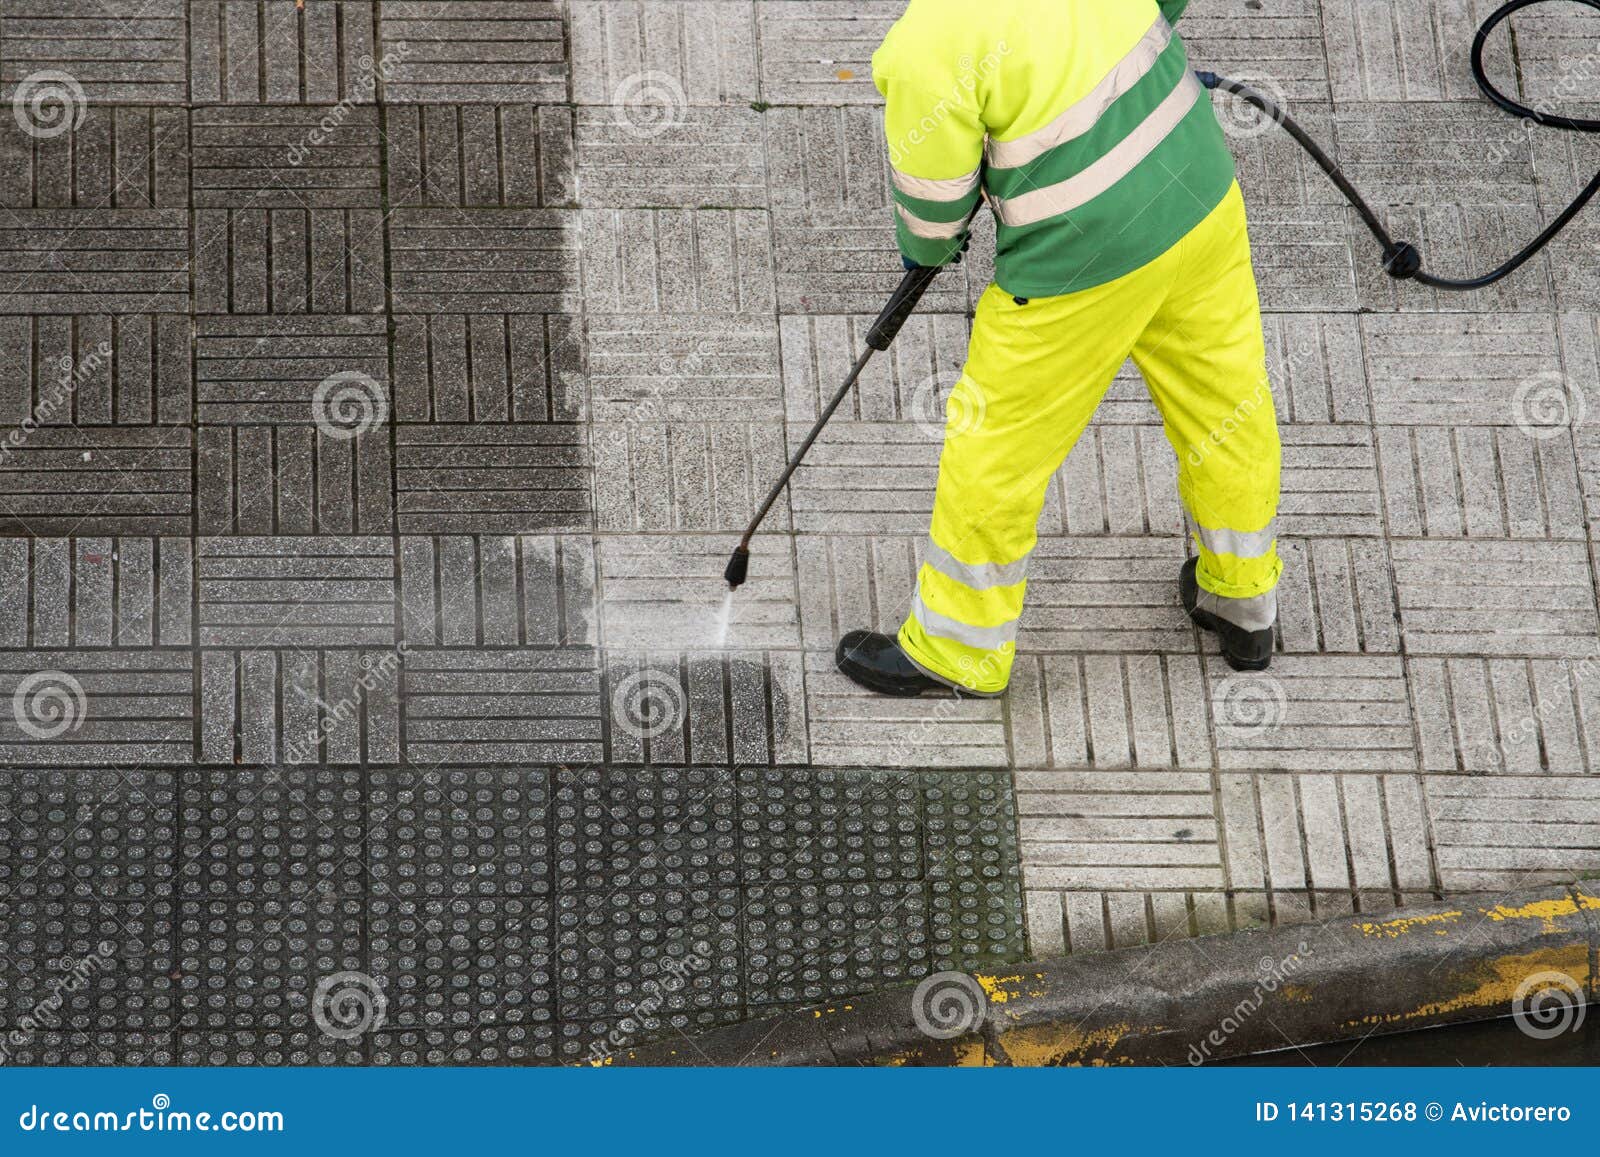 worker cleaning the street sidewalk with high pressure water jet